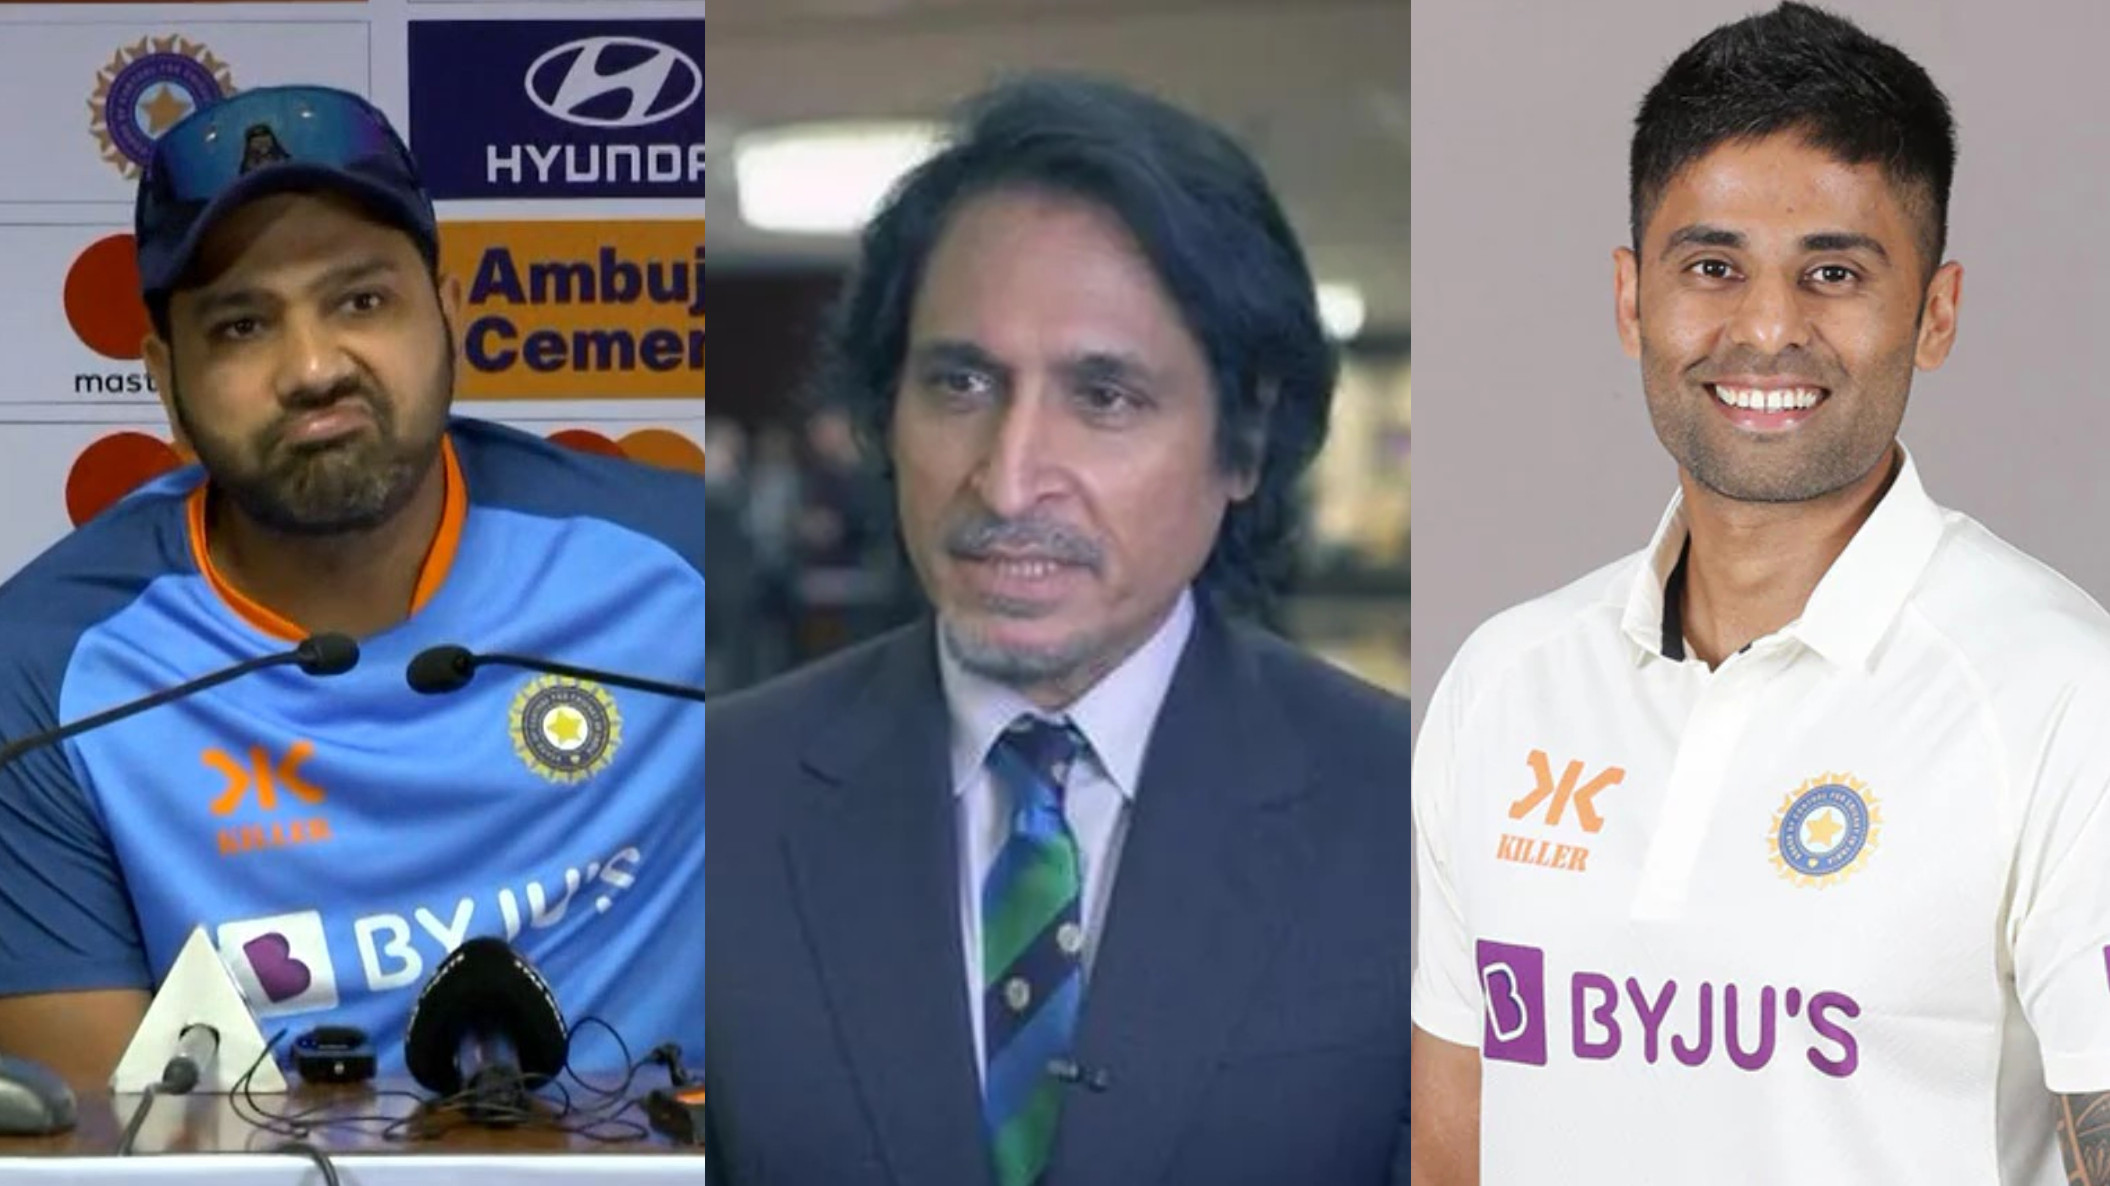 IND v AUS 2023: Ramiz Raja urges India to play Suryakumar Yadav; opines this series a test for Rohit’s captaincy